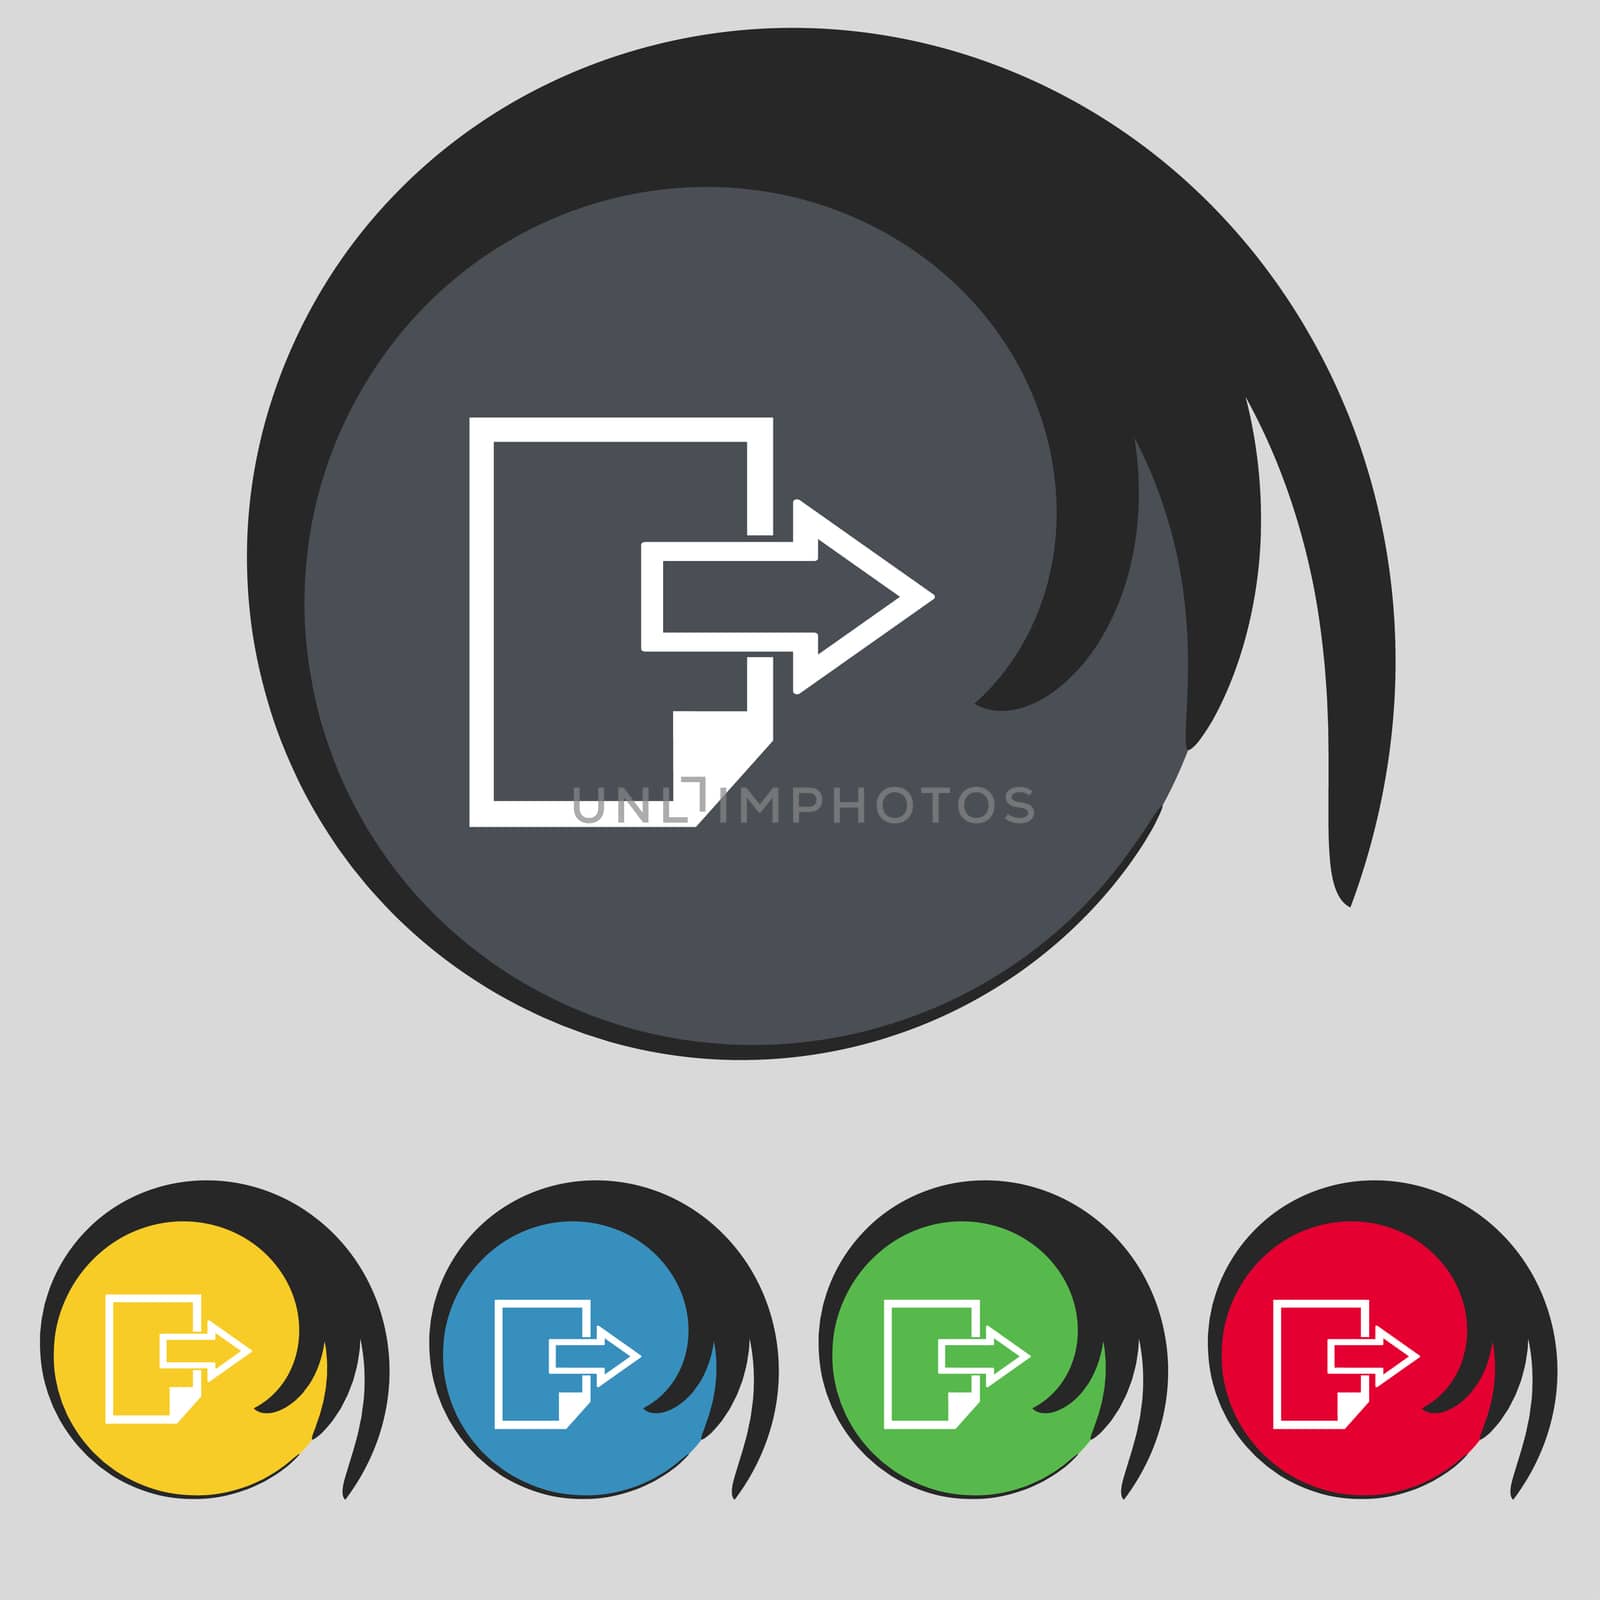 Export file icon. File document symbol. Set of colored buttons. illustration